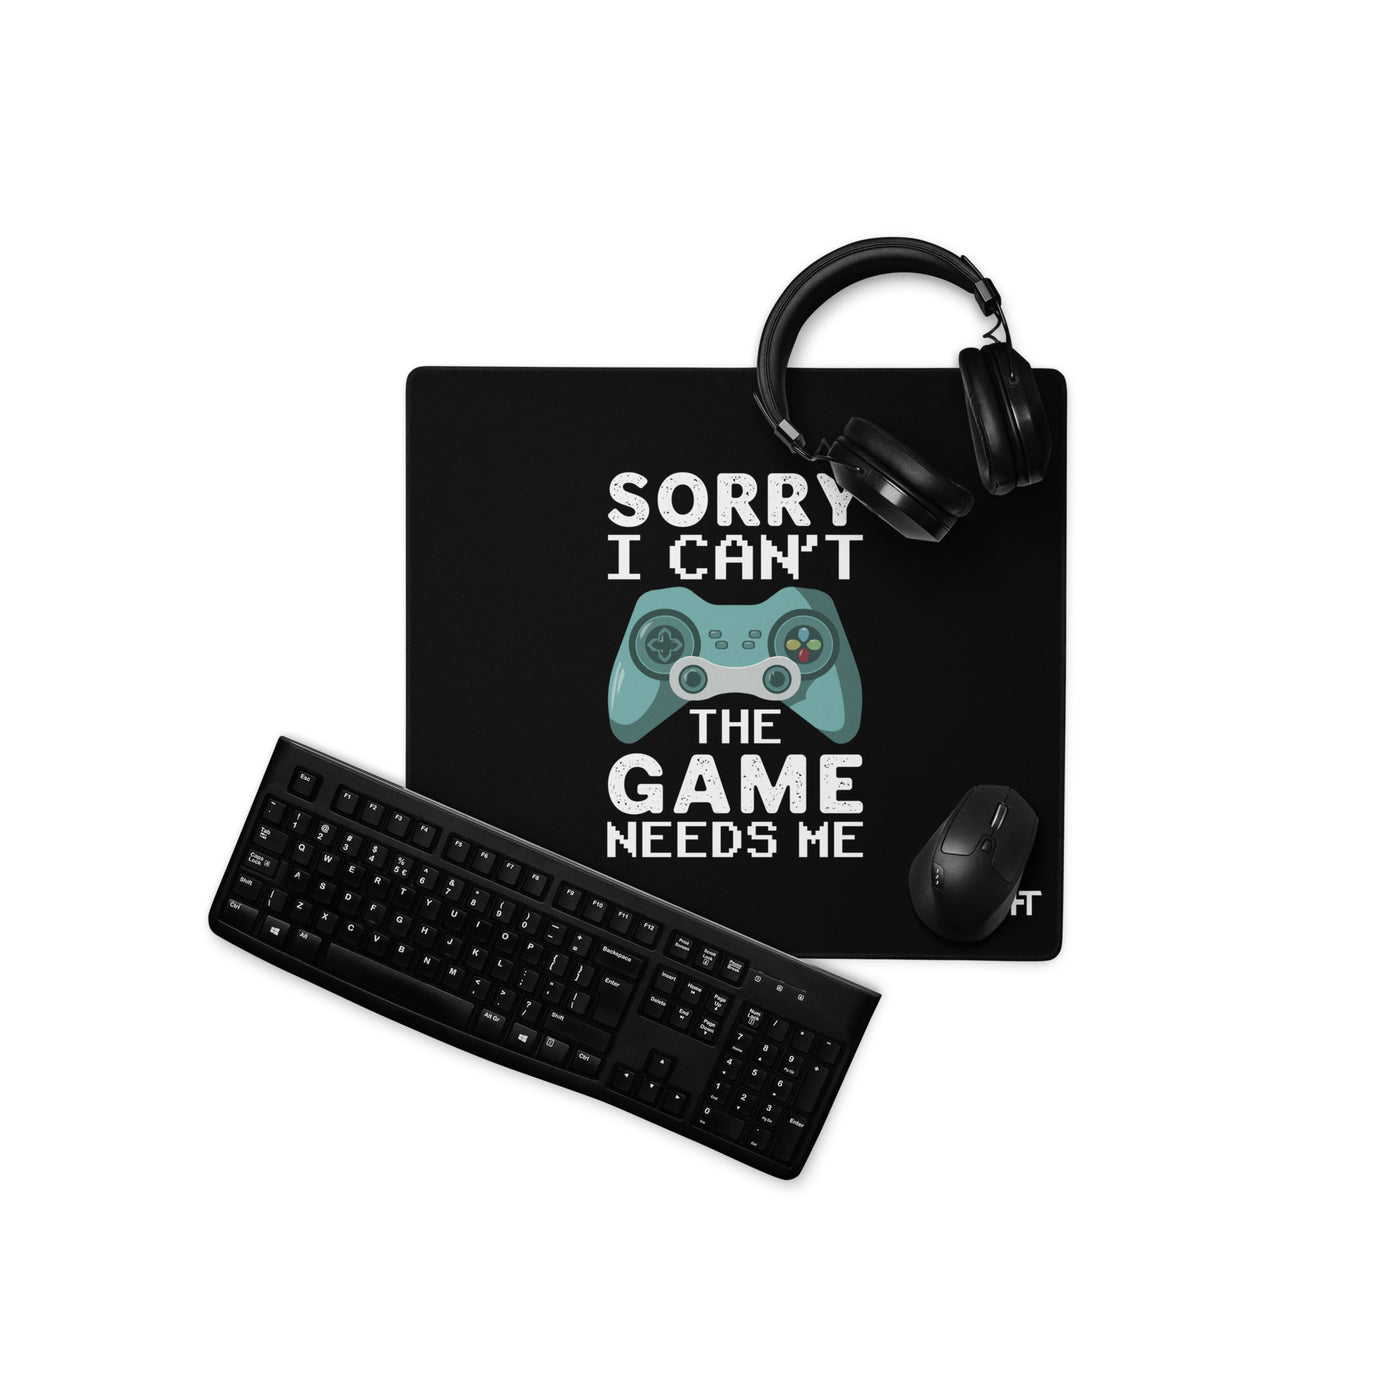 Sorry! I can't, The Game needs me - Desk Mat